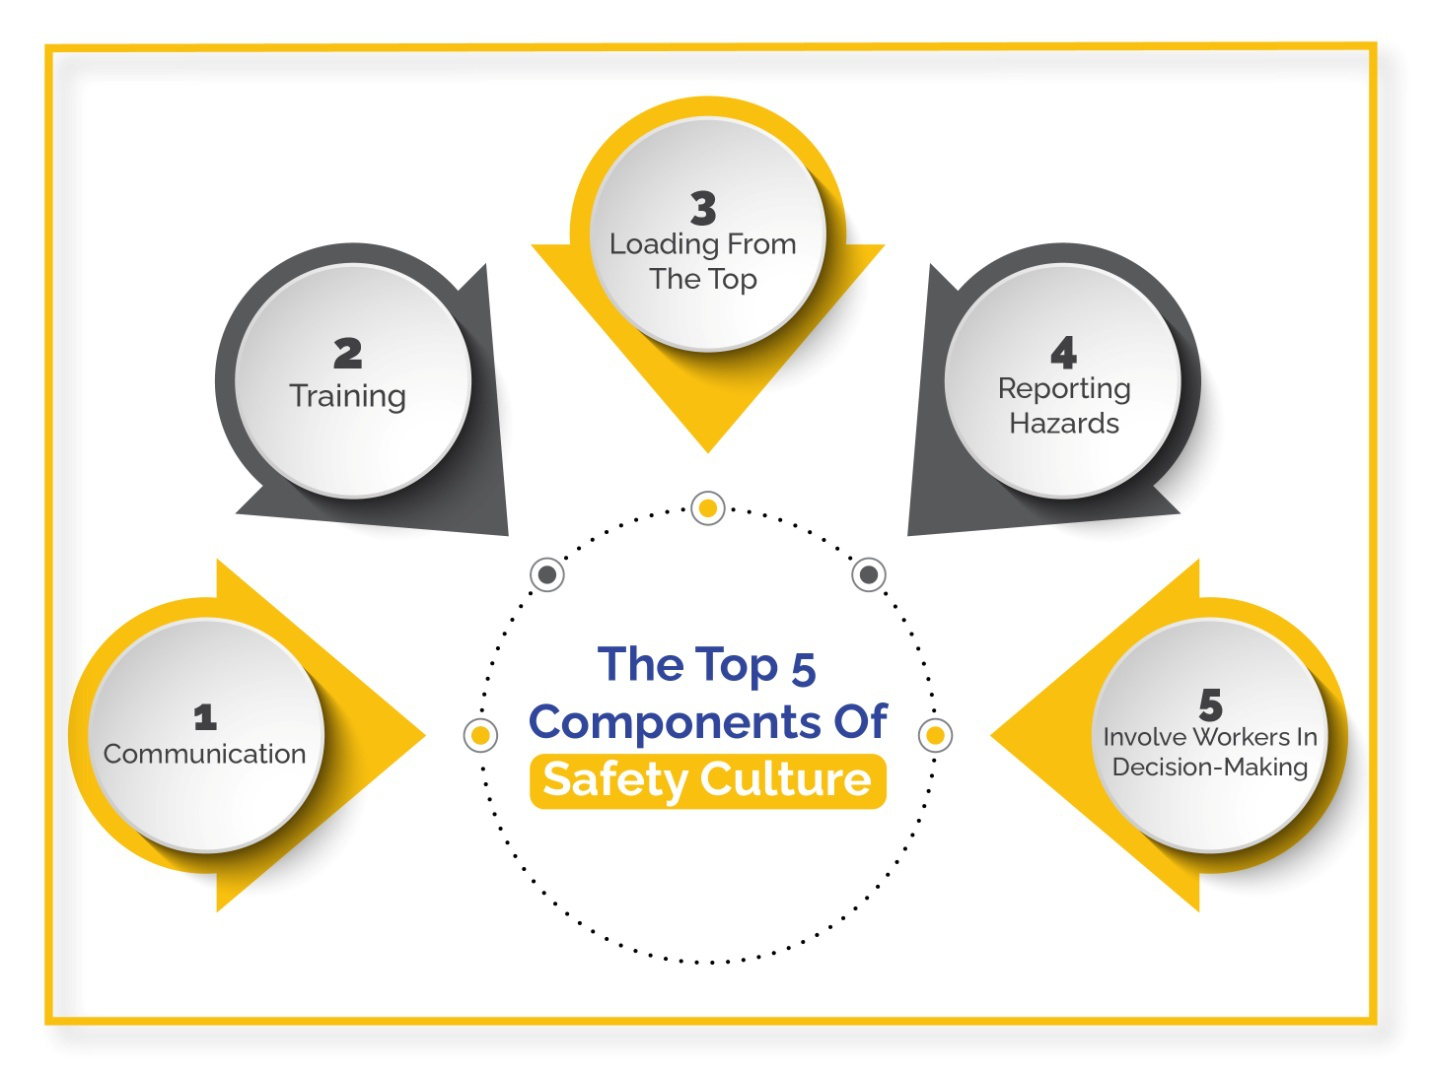 An infographic stating the top components of safety culture